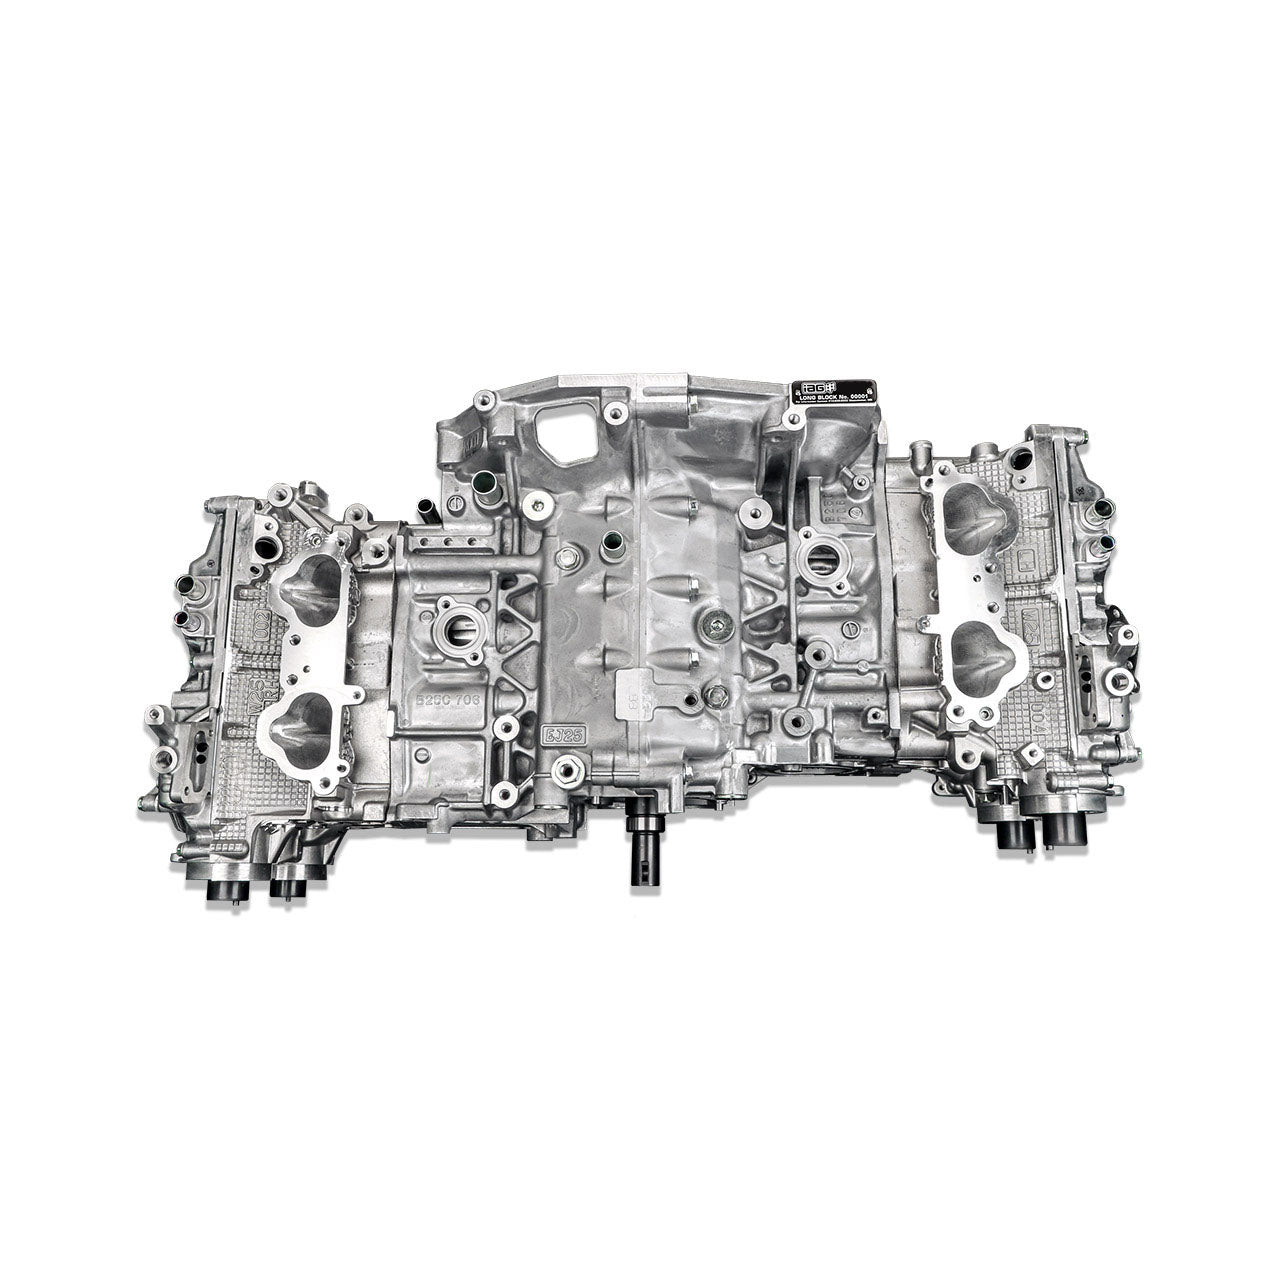 IAG 1150 Closed Deck Long Block Engine W/ IAG 1150 Heads / GSC S3 Camshafts For 08-18 STI (REQUIRES Standalone Engine Management May Not Be Compatible With AVCS)